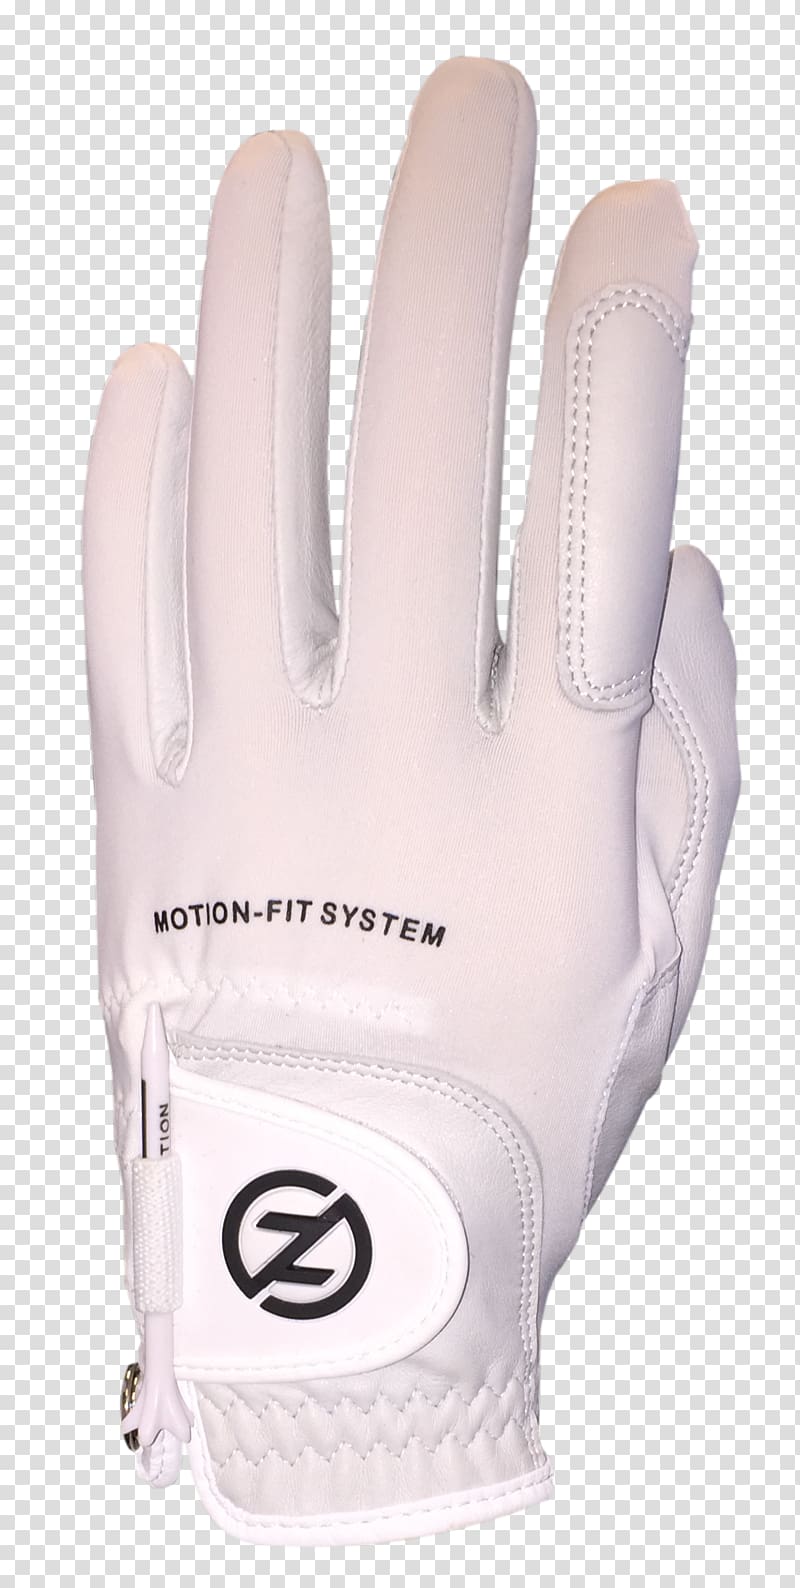 Lacrosse glove Sporting Goods Golf Friction, gloves transparent background PNG clipart